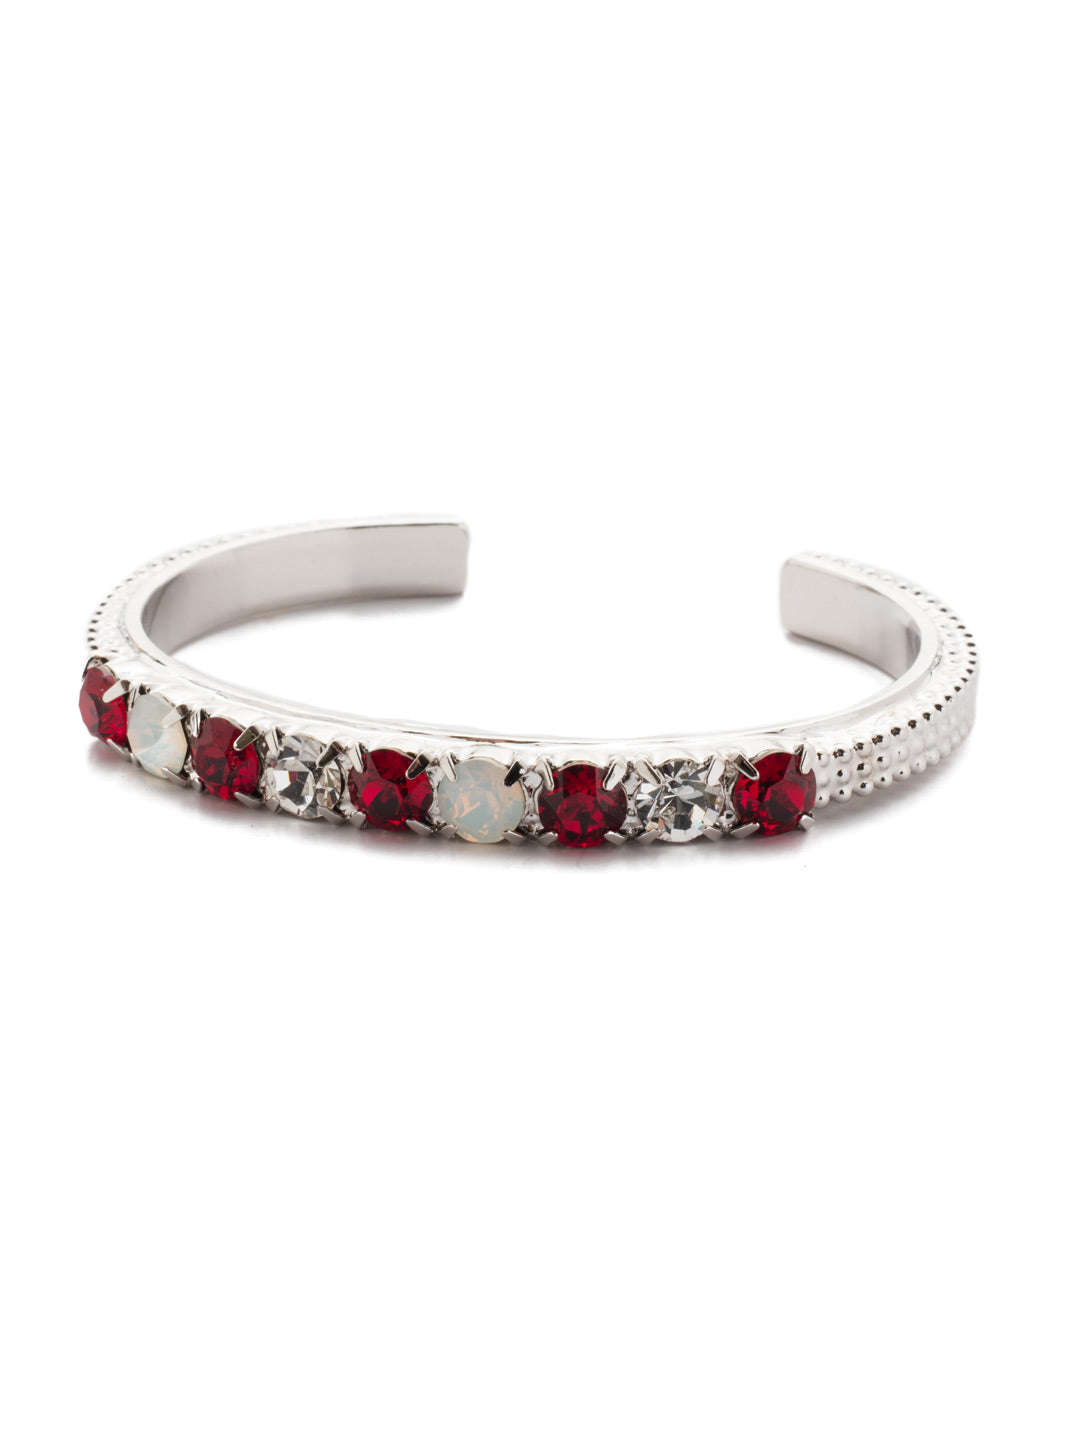 Macy Cuff Bracelet - 4BEN11RHCP - This crystal cuff is perfect for any day you want to add a little sparkle to make you shine. From Sorrelli's Crimson Pride collection in our Palladium Silver-tone finish.